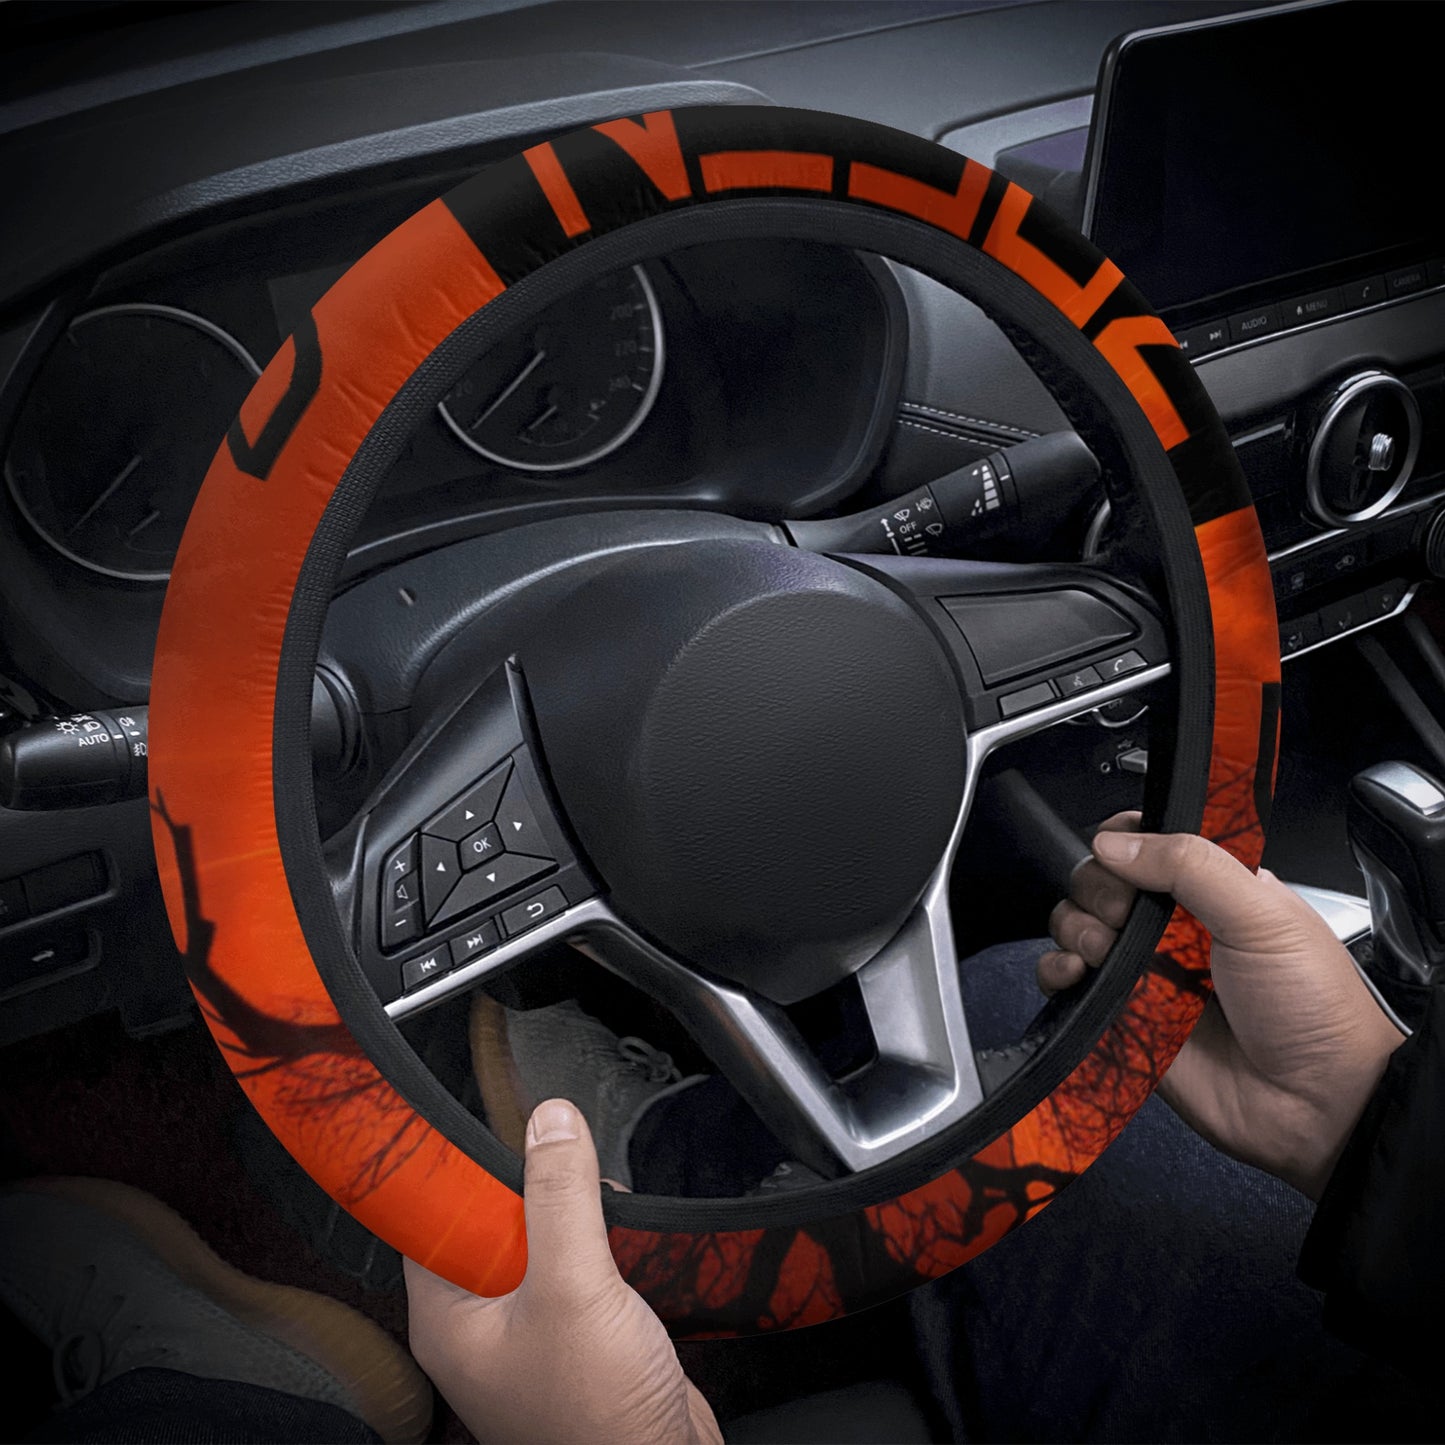 Neduz Crimson Sun Car Steering Wheel Covers: Upgrade Your Ride with Style and Protection